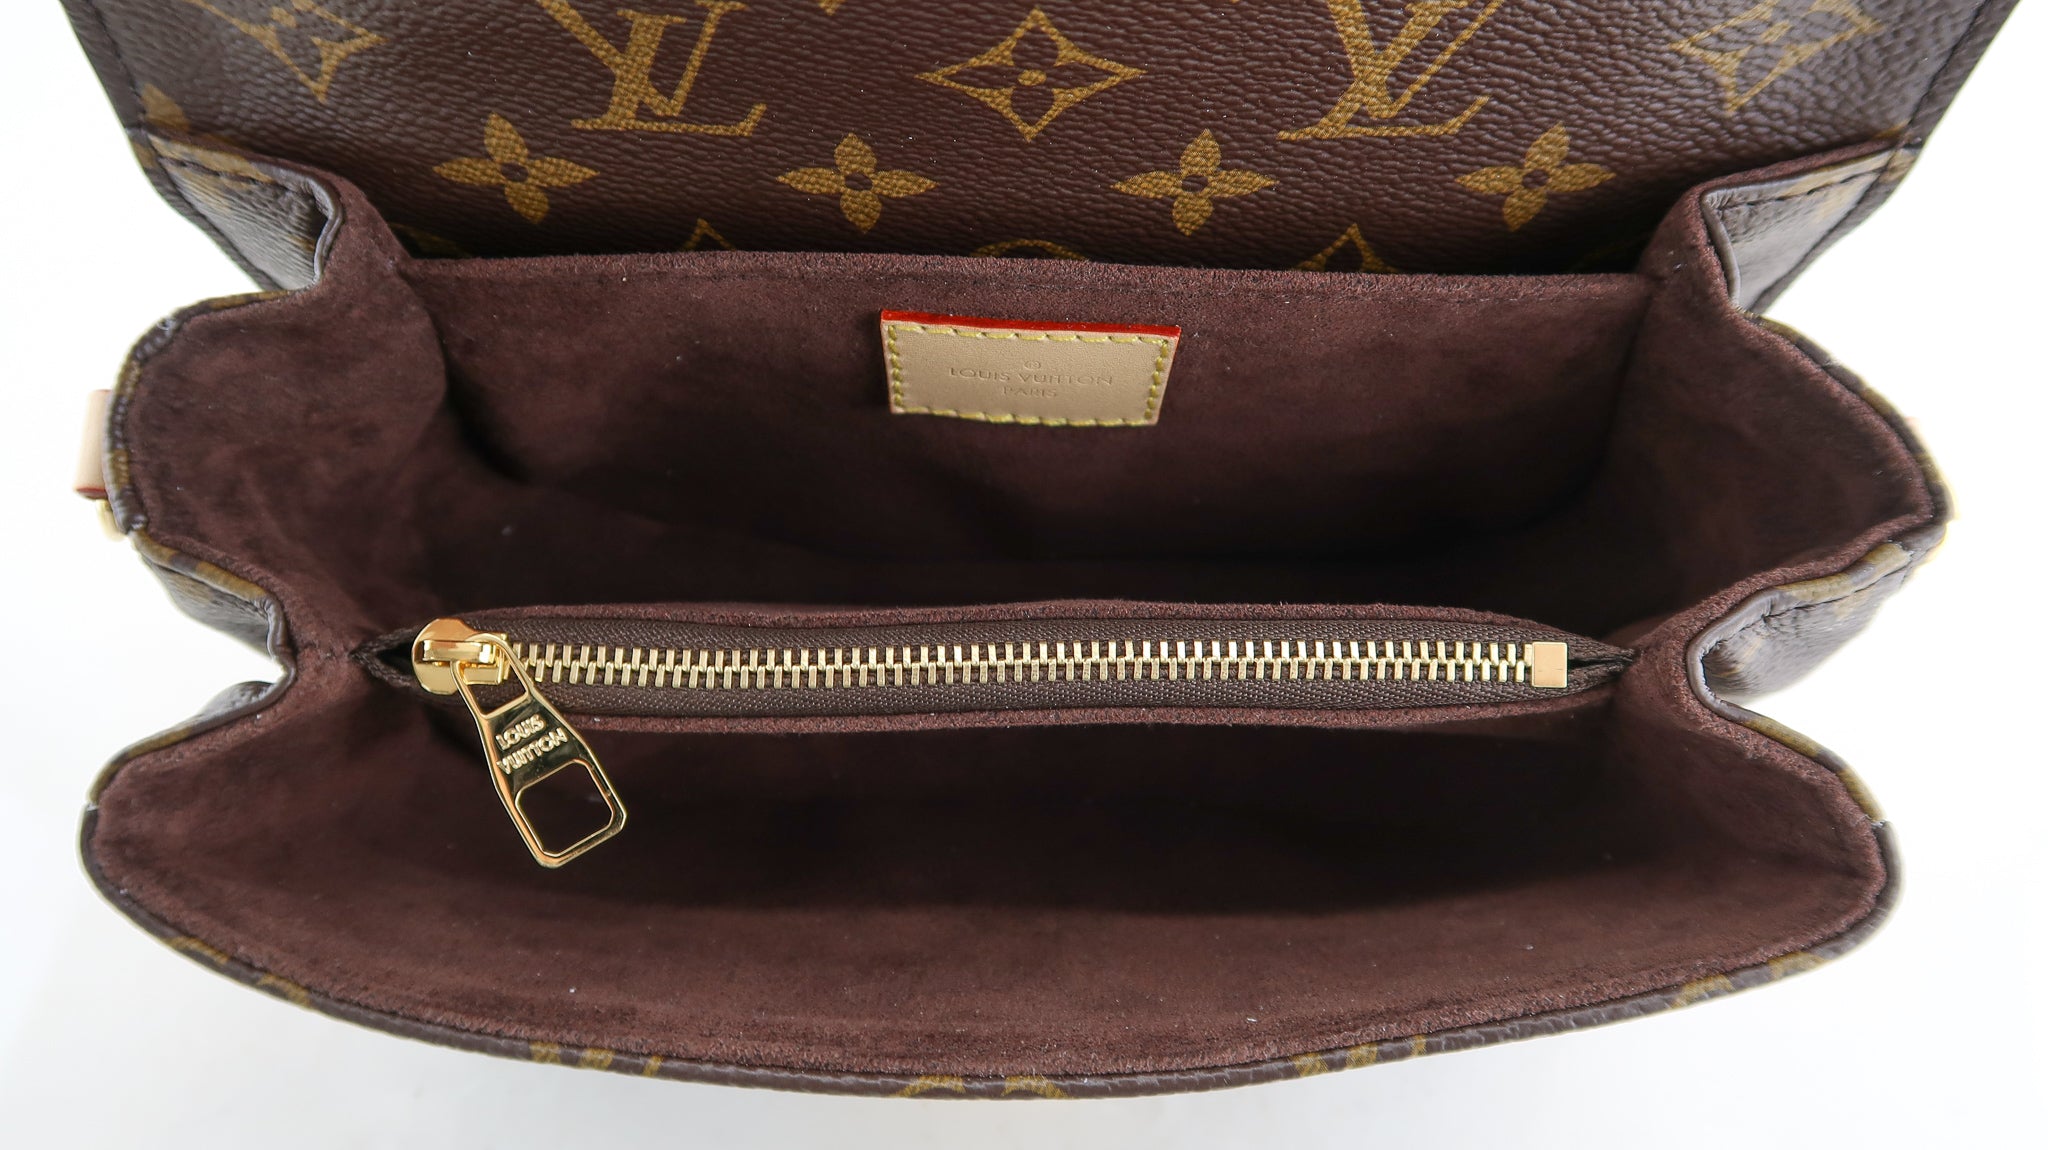 New East West Pochette Metis, 10/28 launch from Foxylv! Thoughts? :  r/Louisvuitton